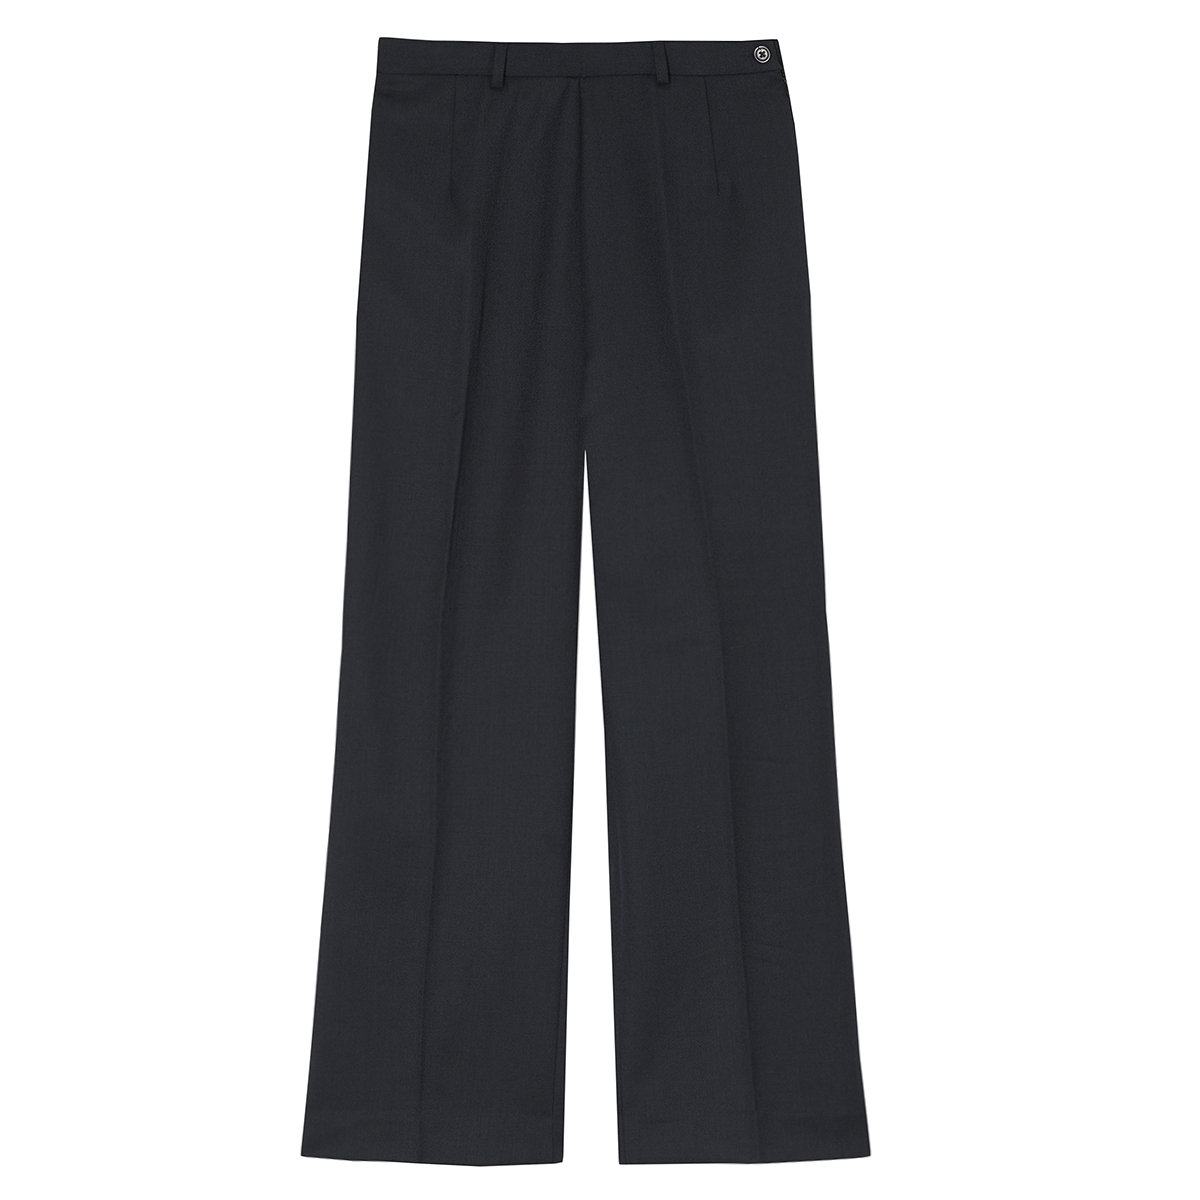 Women's Flat Front Work Trousers (Sizes 8-14) Bootleg Formal Office ...